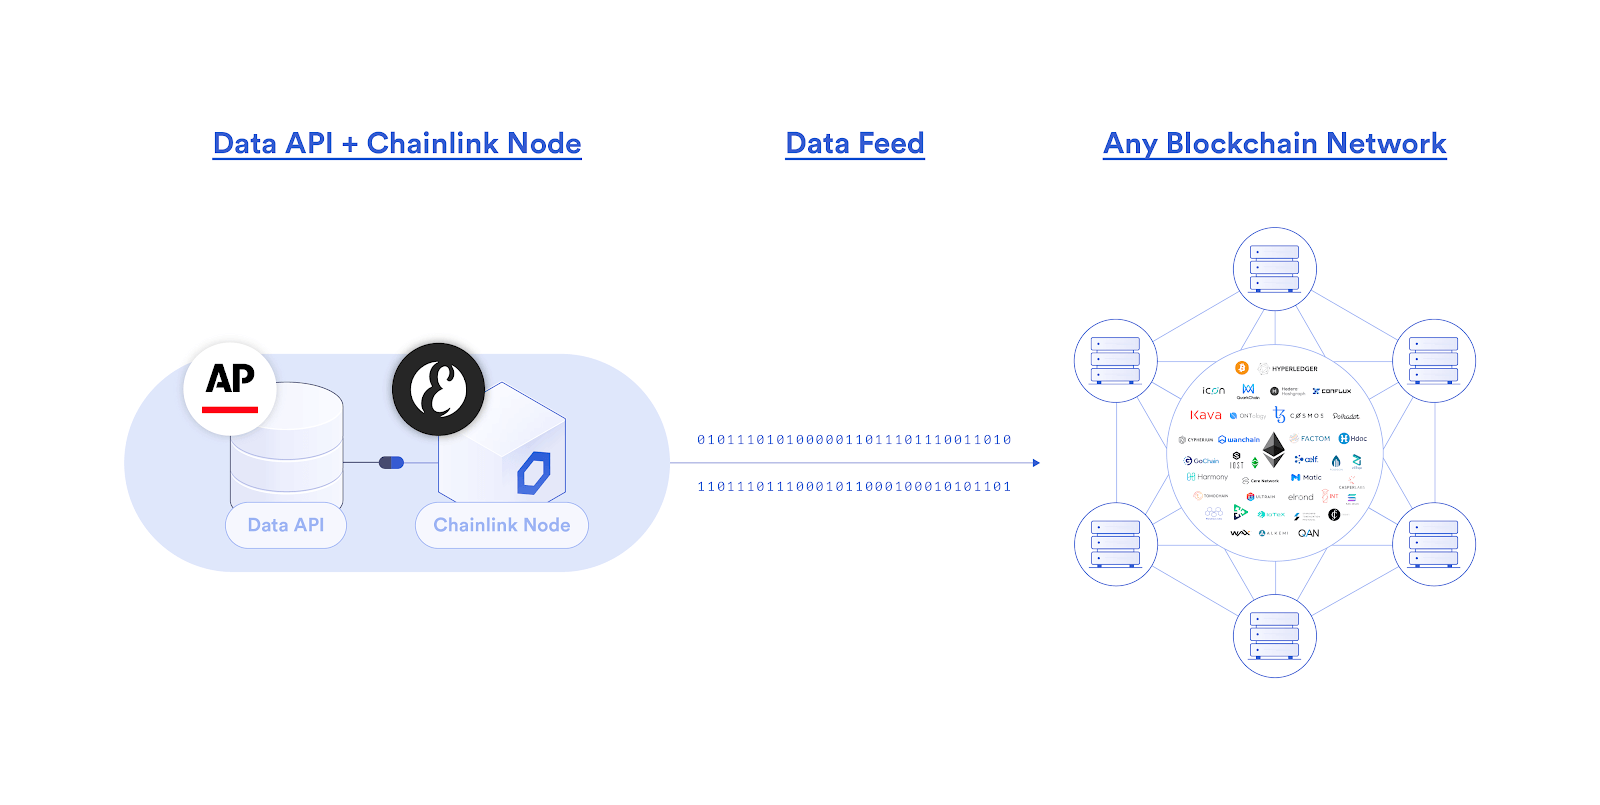 Everipedia’s Chainlink node recently delivered the results of the 2020 US Presidential Election on-chain using data cryptographically signed by The Associated Press